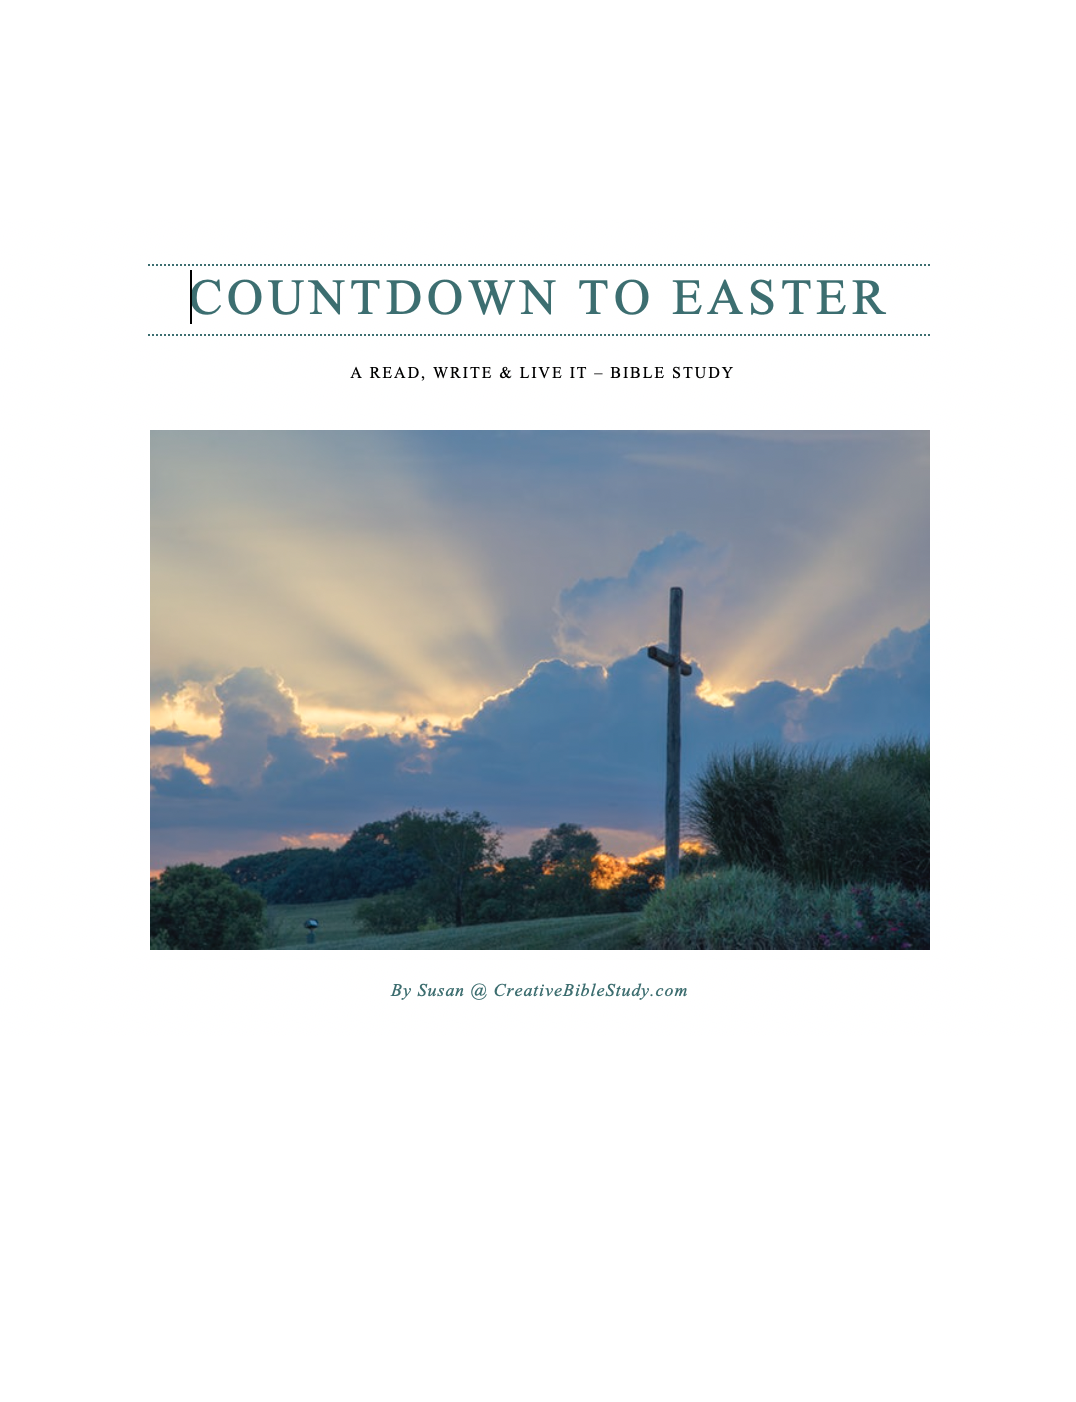 Easter Bible study free ebook